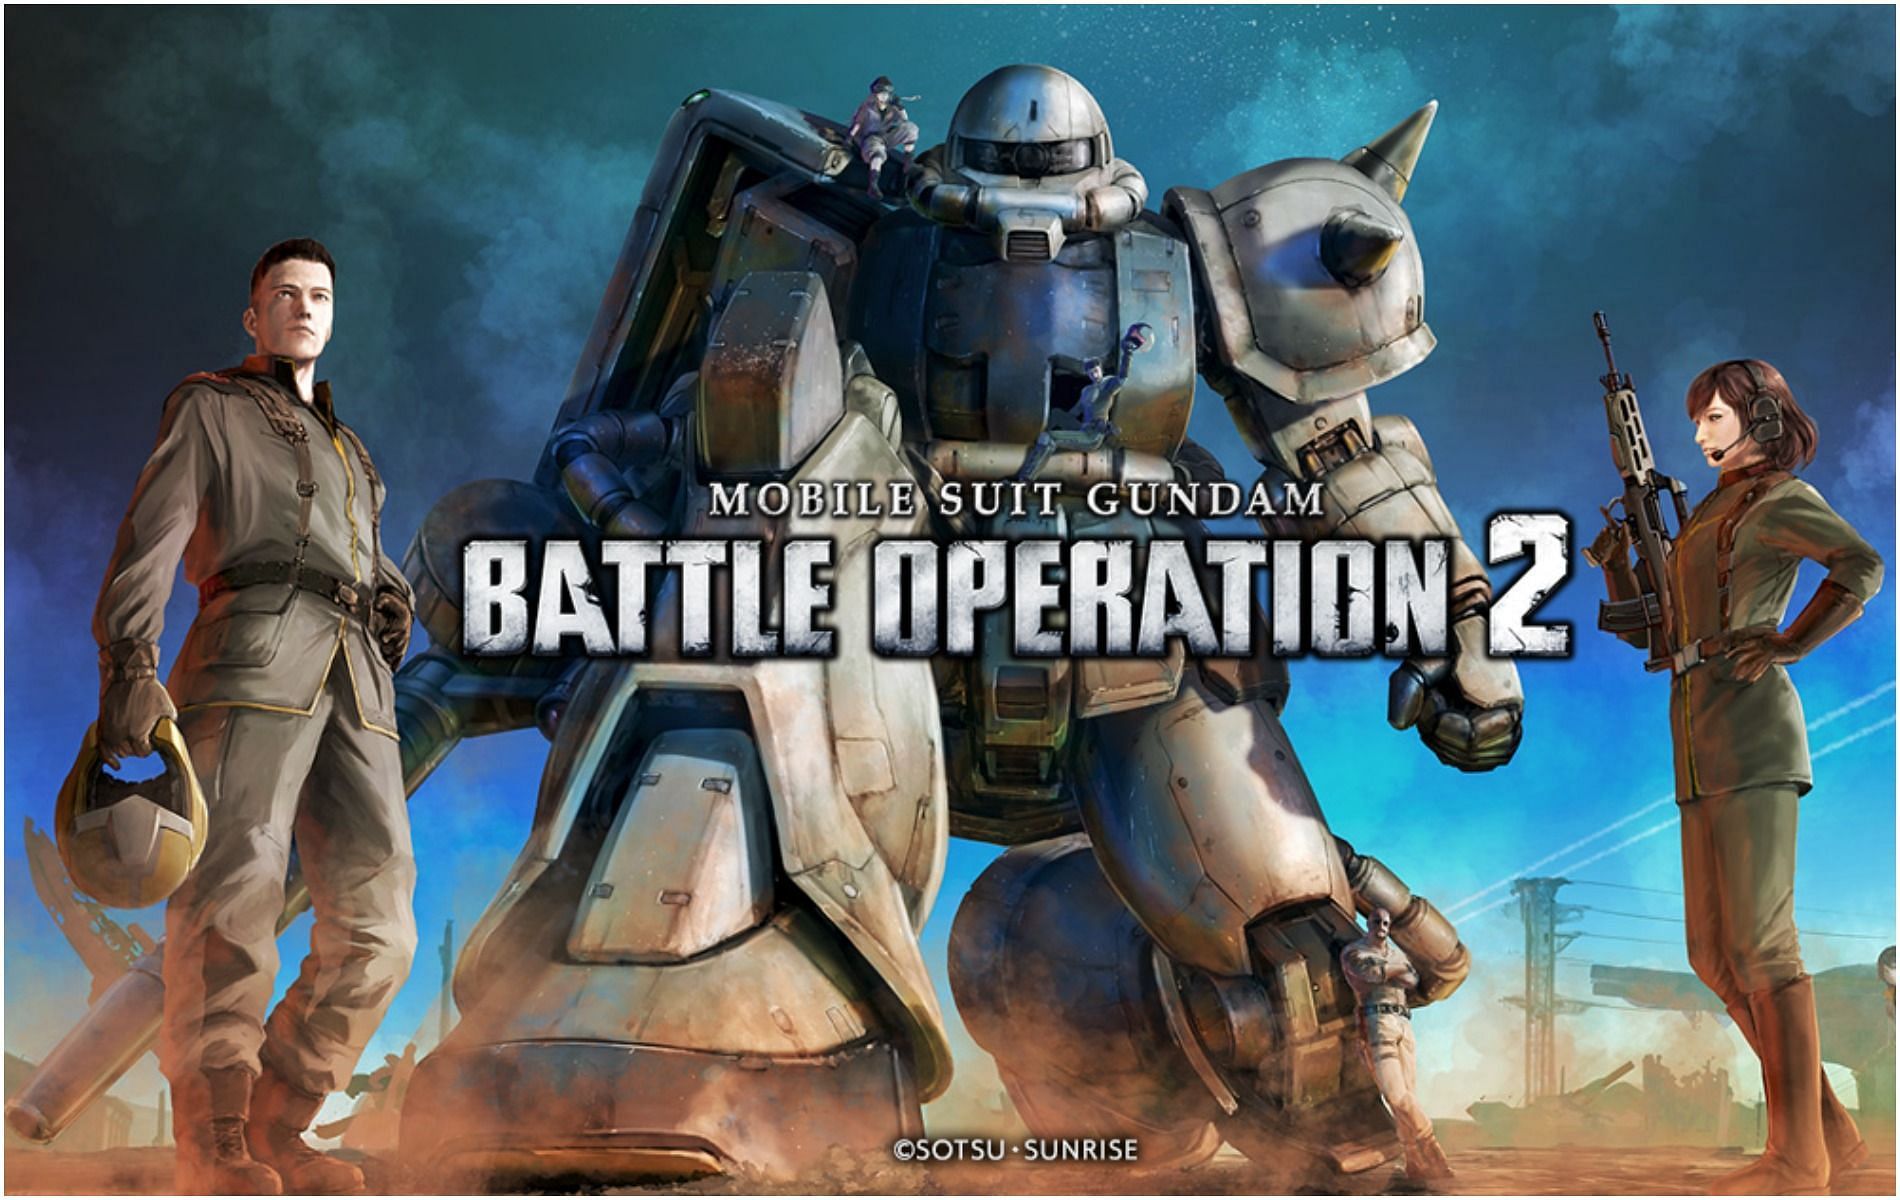 Mobile Suit Gundam Battle Operation 2 is coming to PC in 2022, and here are the details (Image via Bandai Namco)